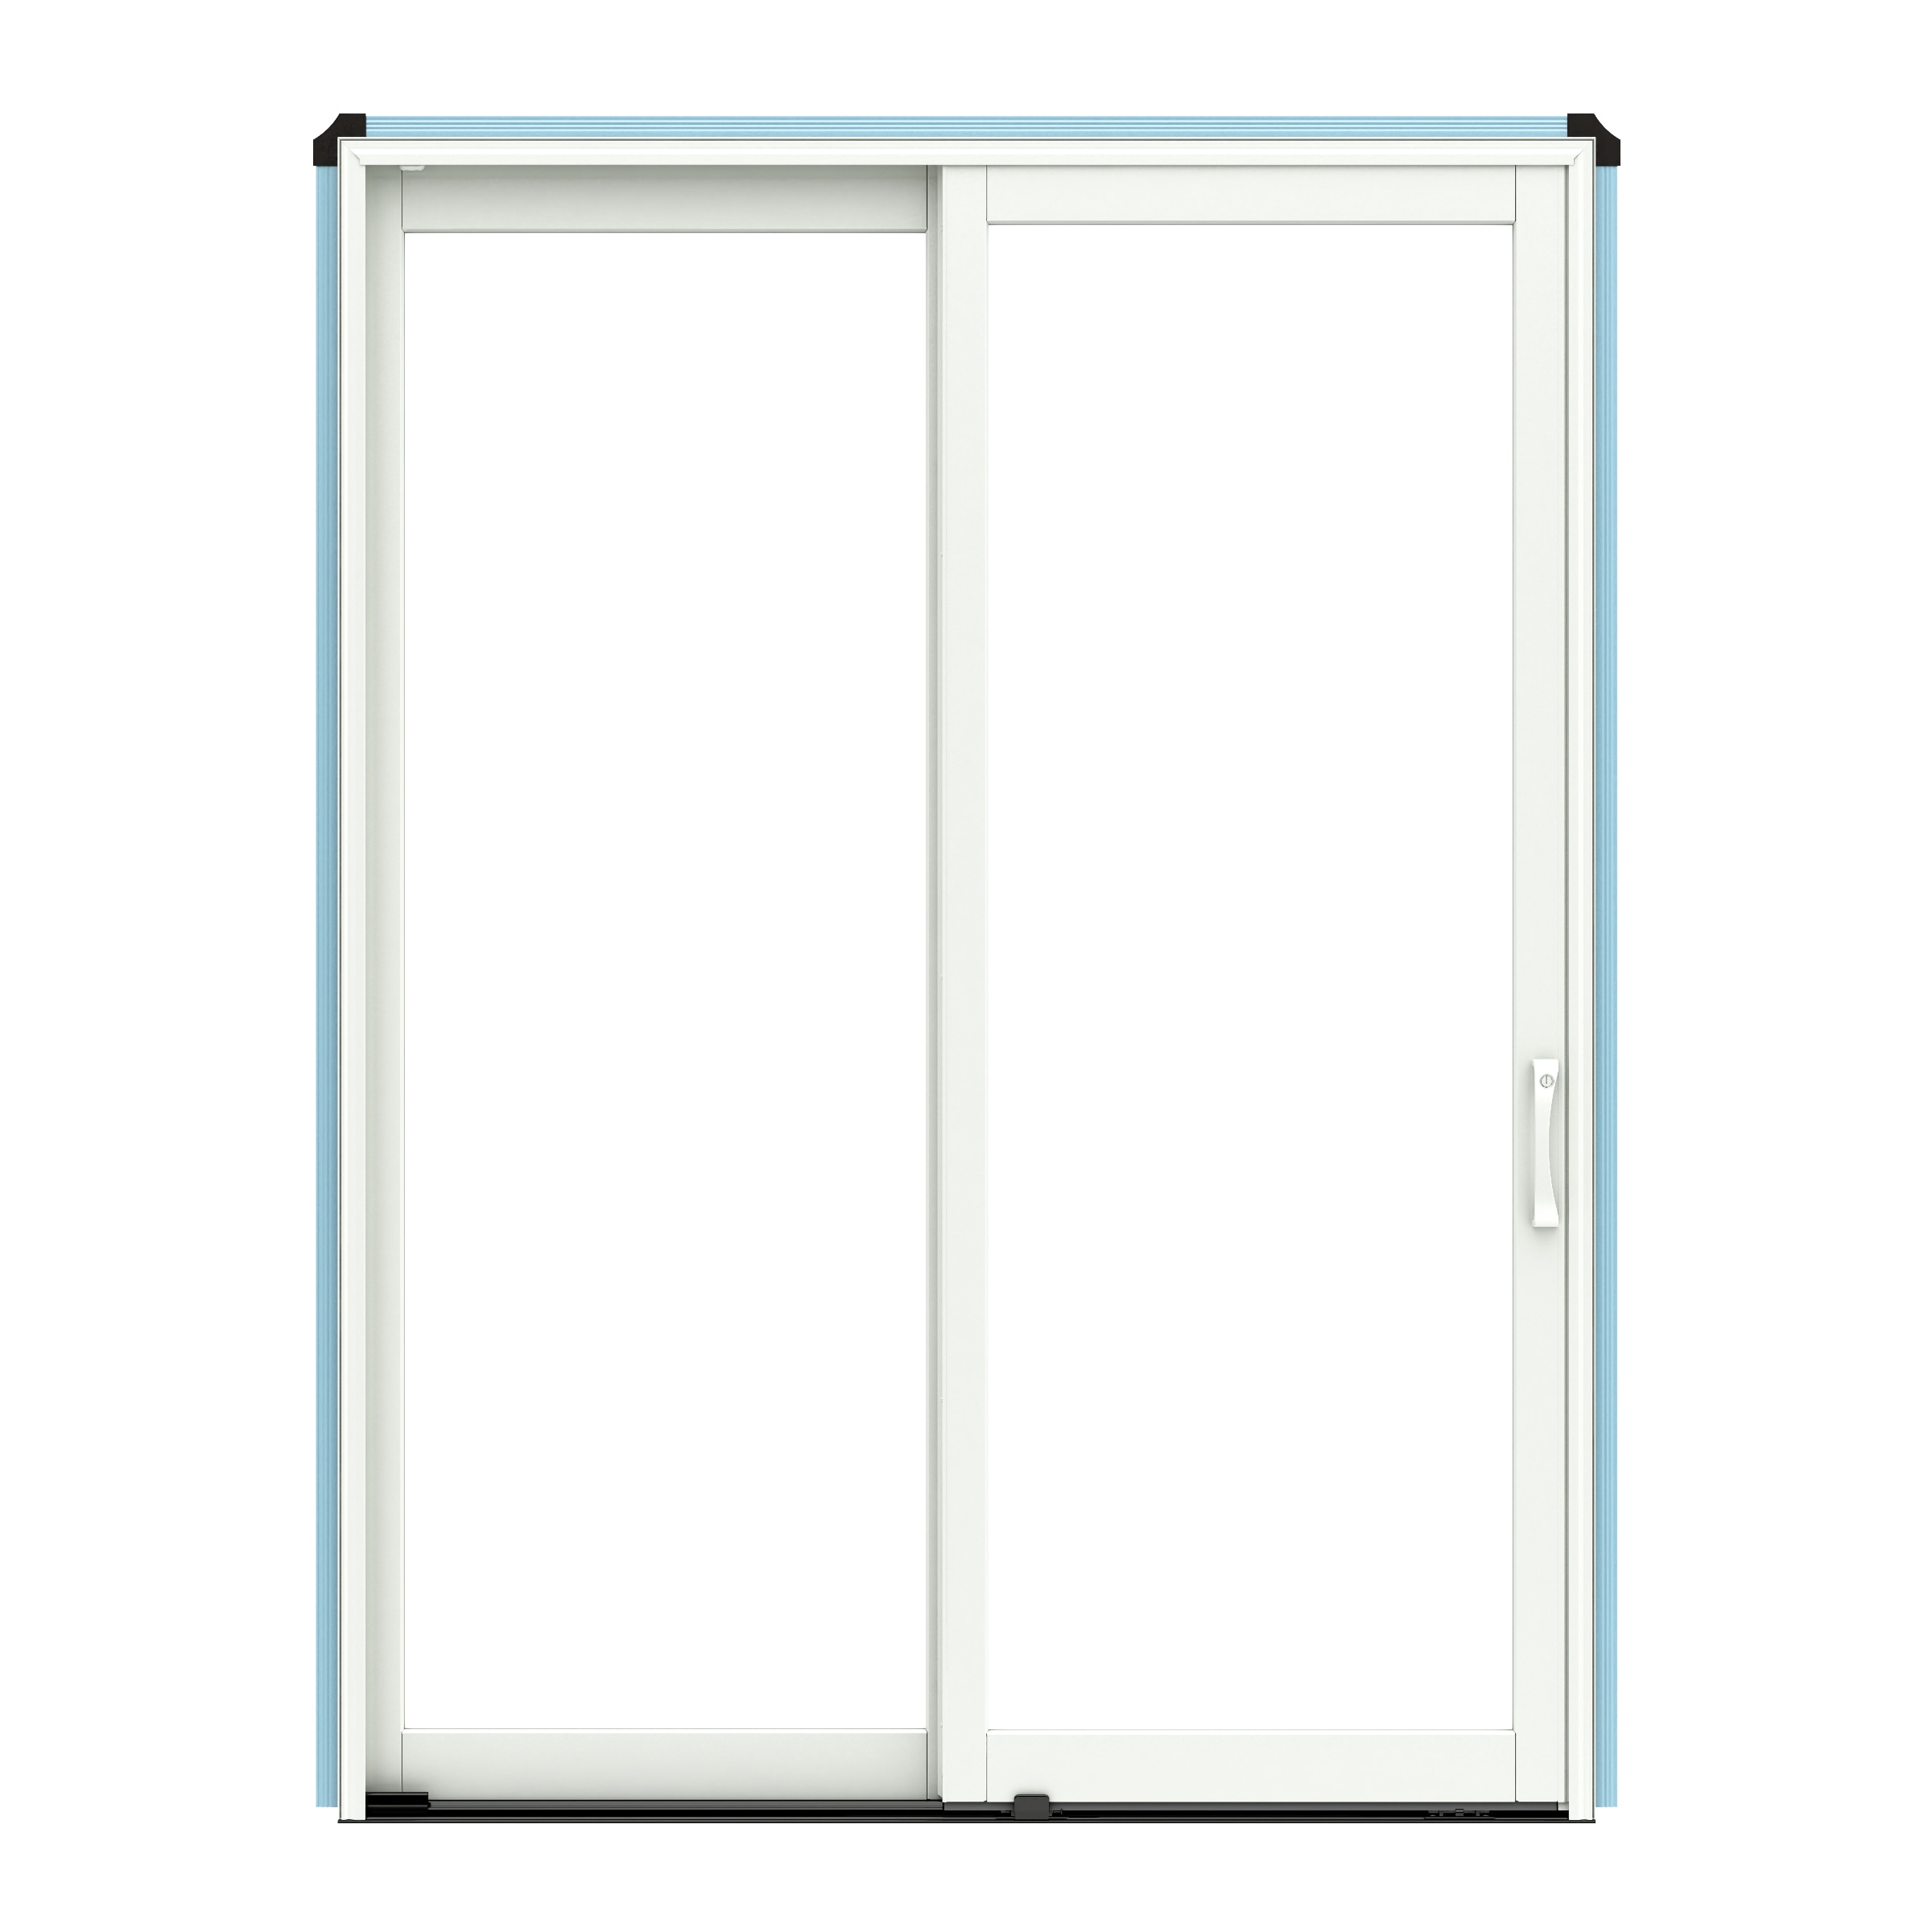 Lifestyle Series 96-in x 96-in Low-e Argon White Wood Sliding Right-Hand Sliding Double Patio Door | - Pella 1000012186